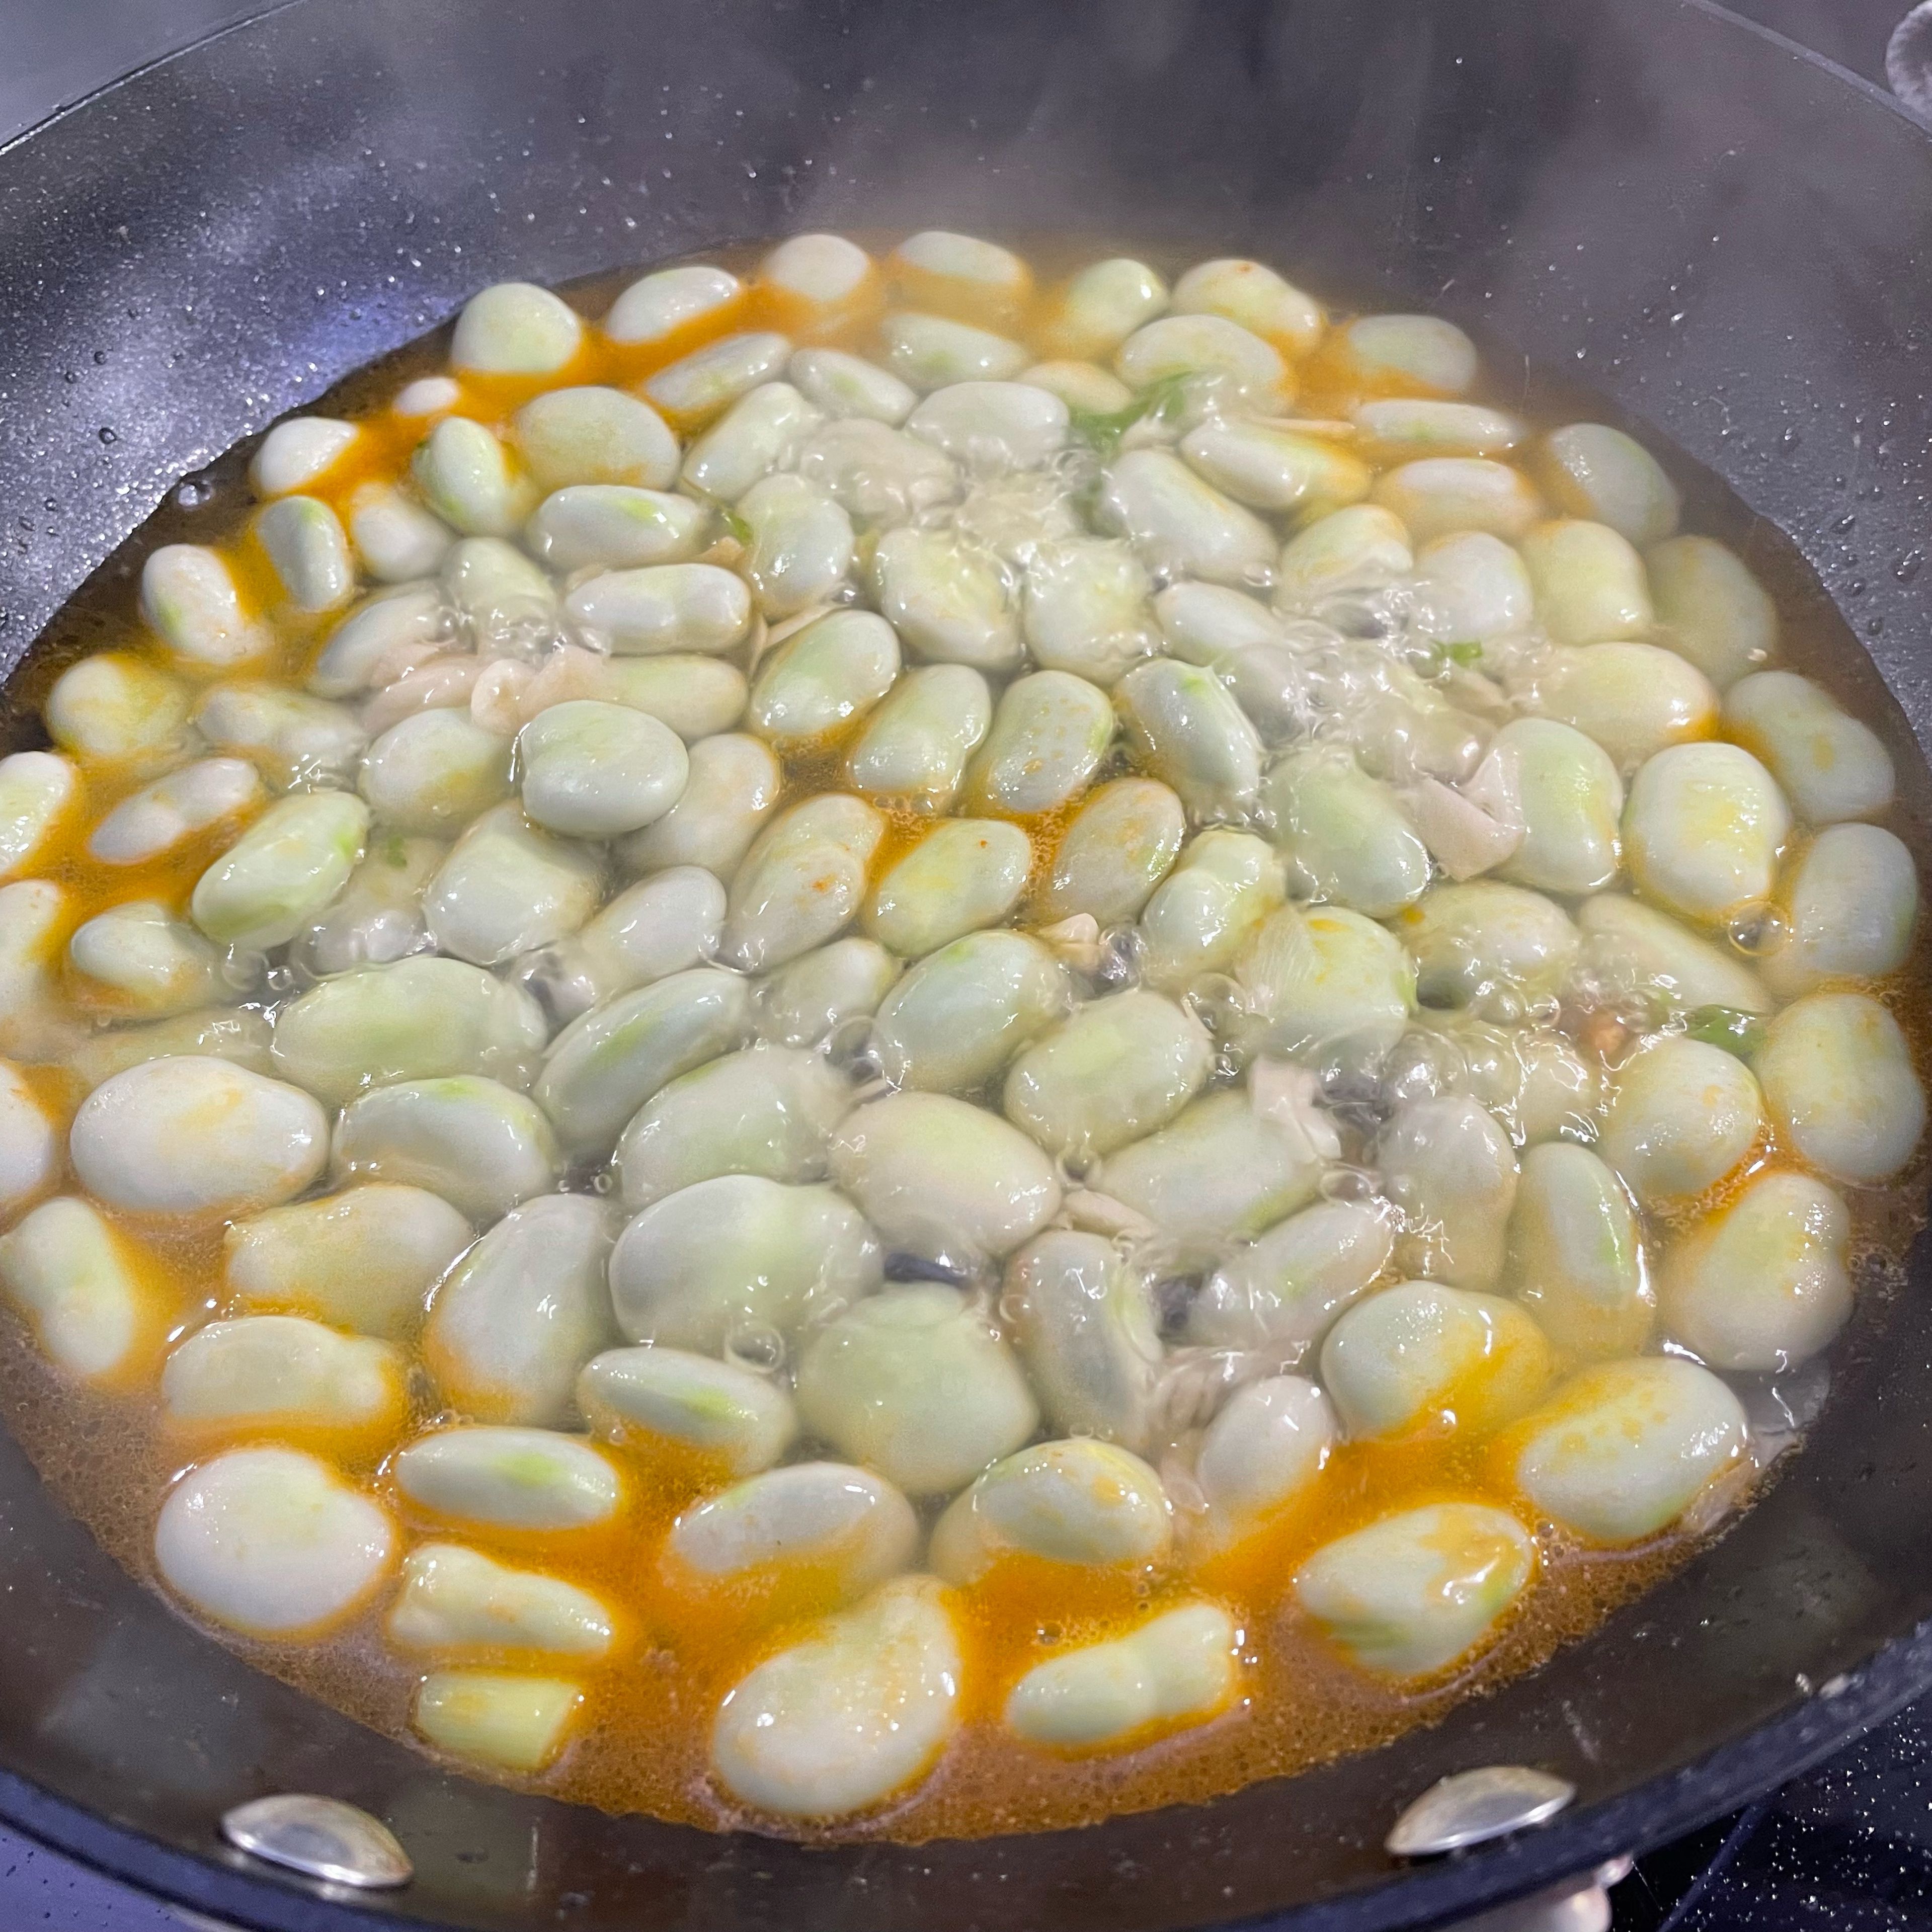 Add oil into pan, stir fry the garlic and spring onion first, then add beans. Fry for 5 mins then add boiled water to cover the beans. Cook for 20 mins